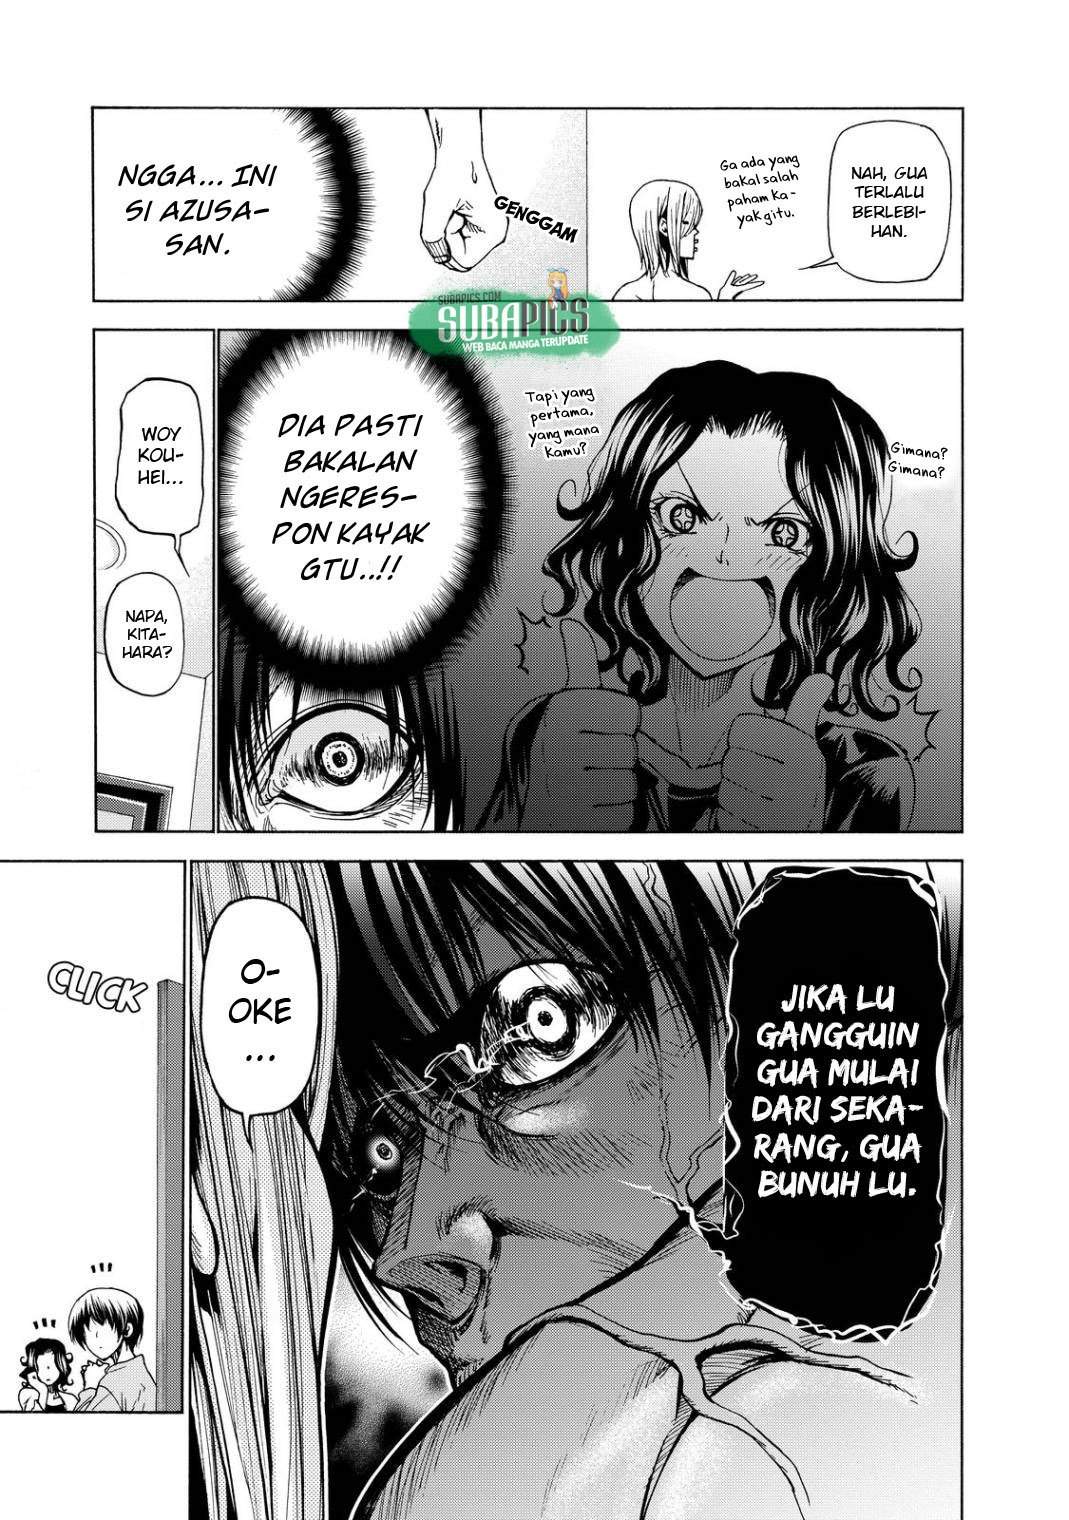 Grand Blue Chapter 28.5 Bahasa Indonesia